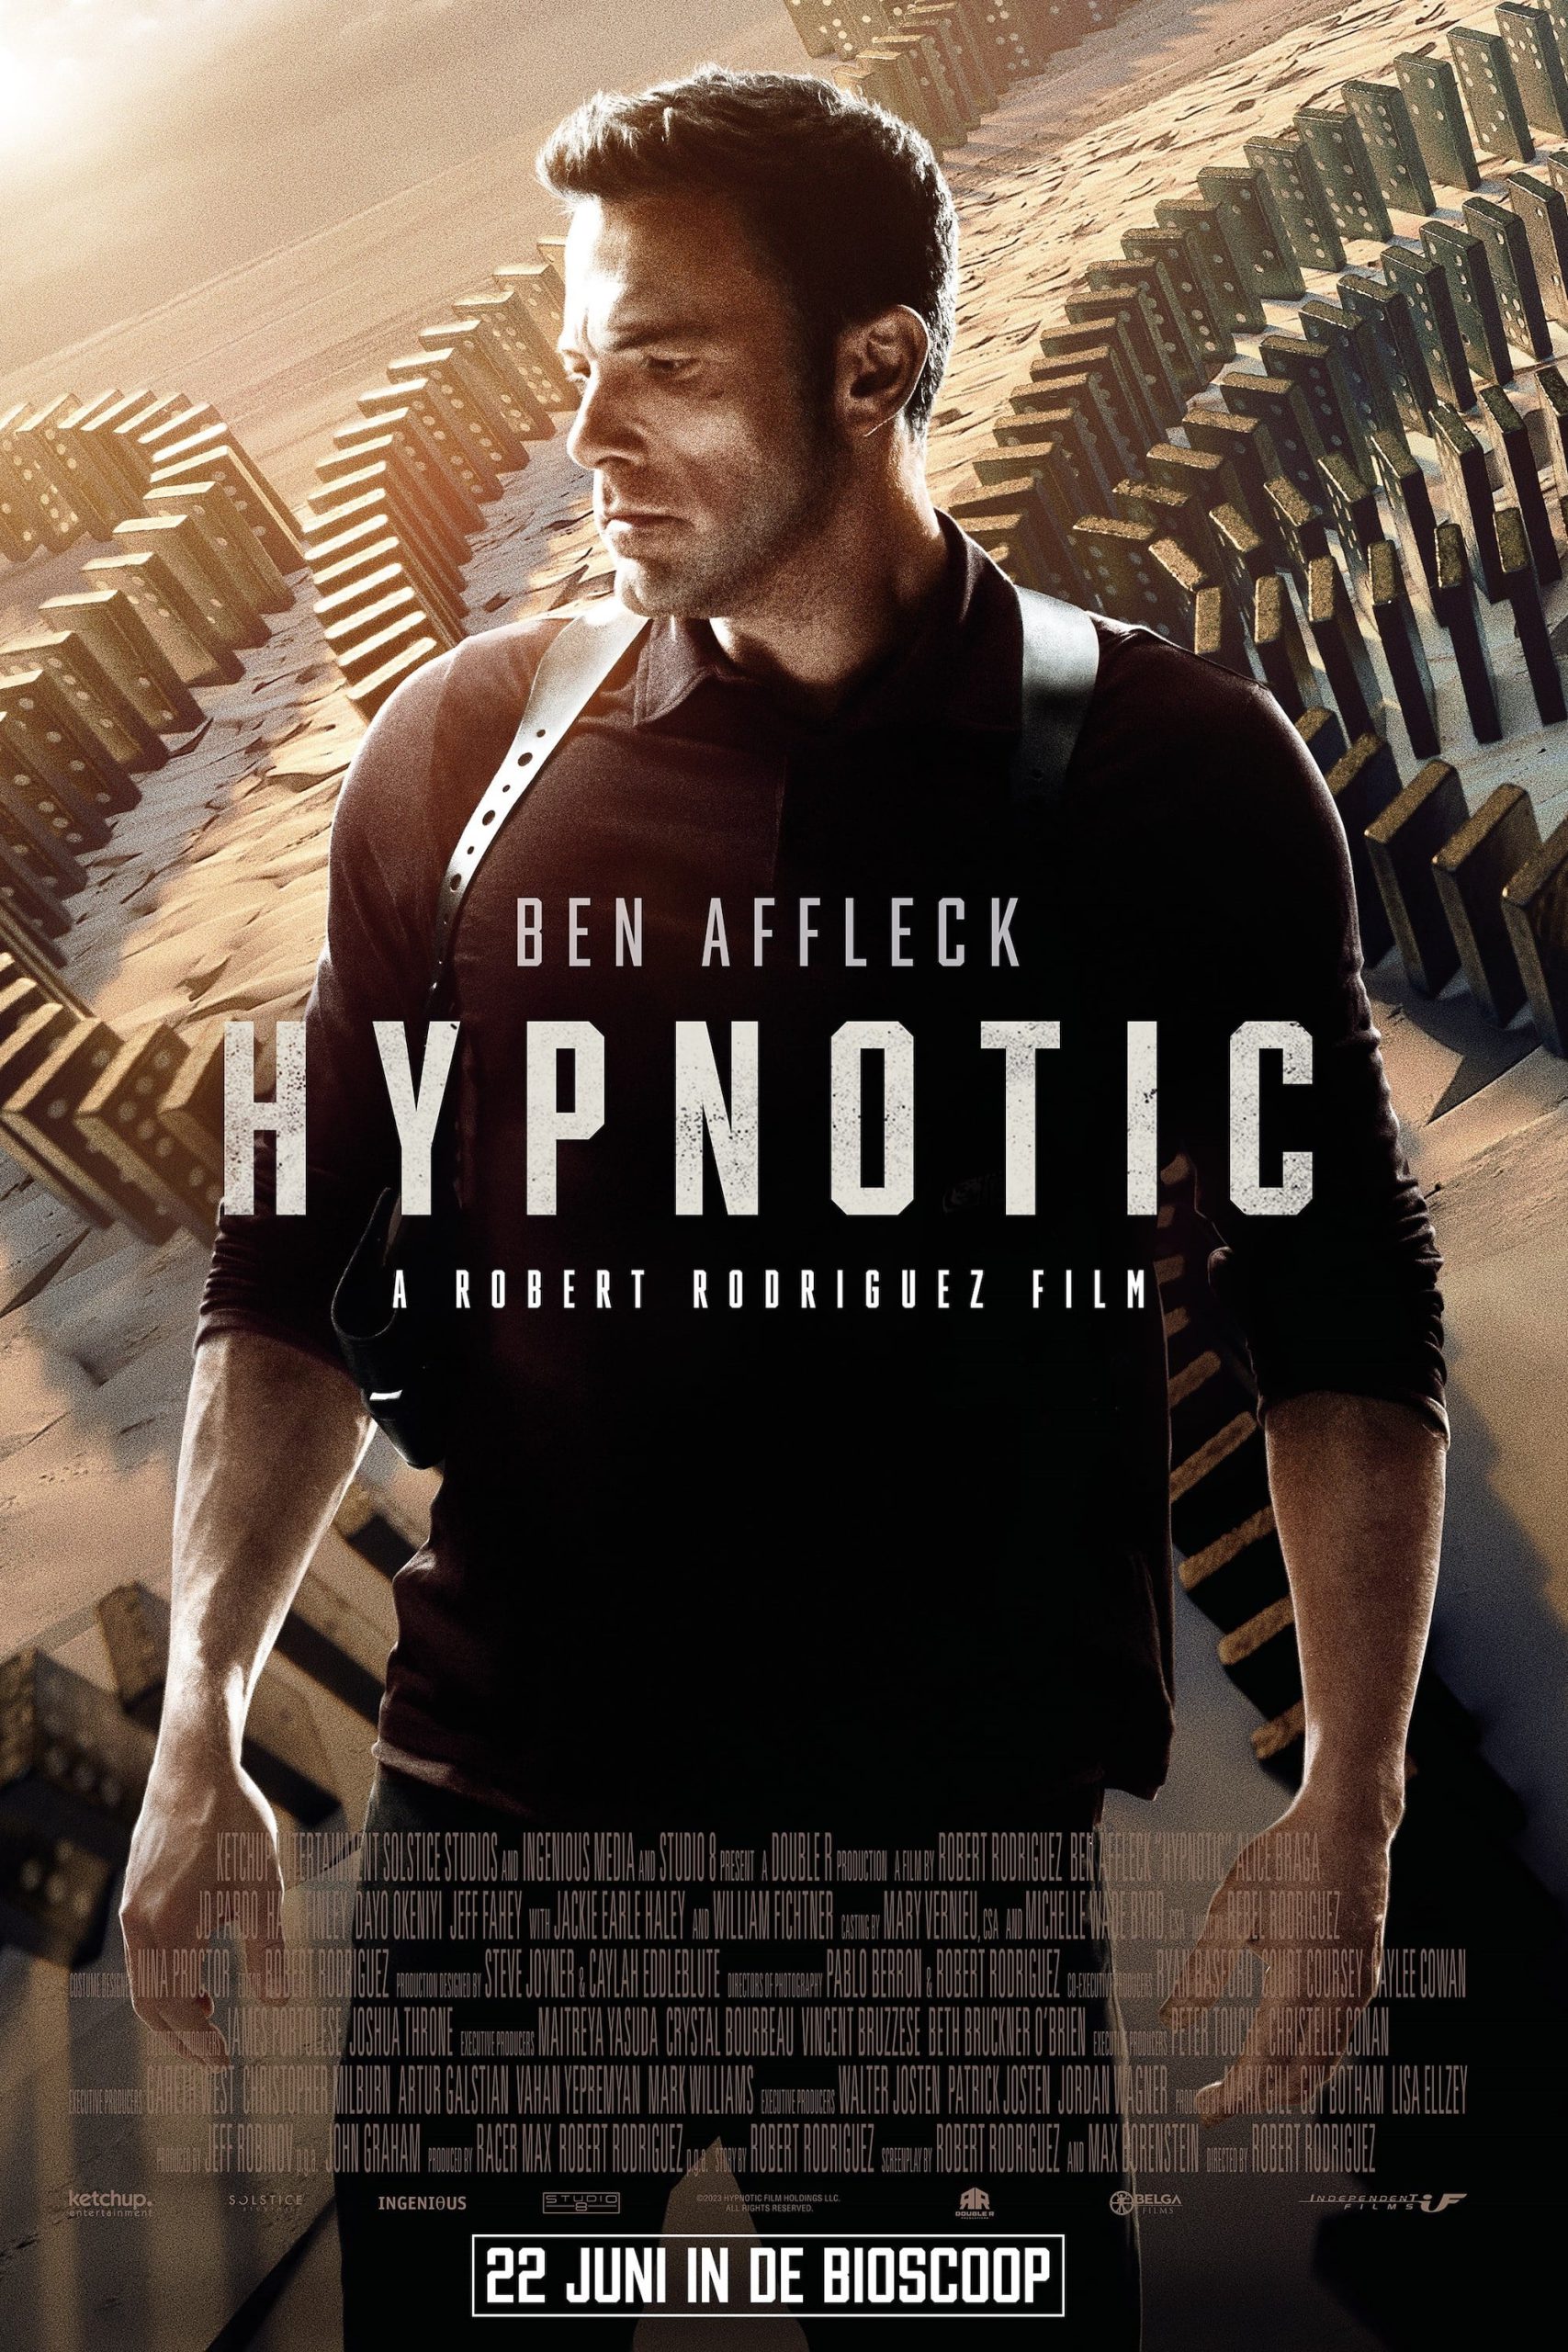 Poster for the movie "Hypnotic"